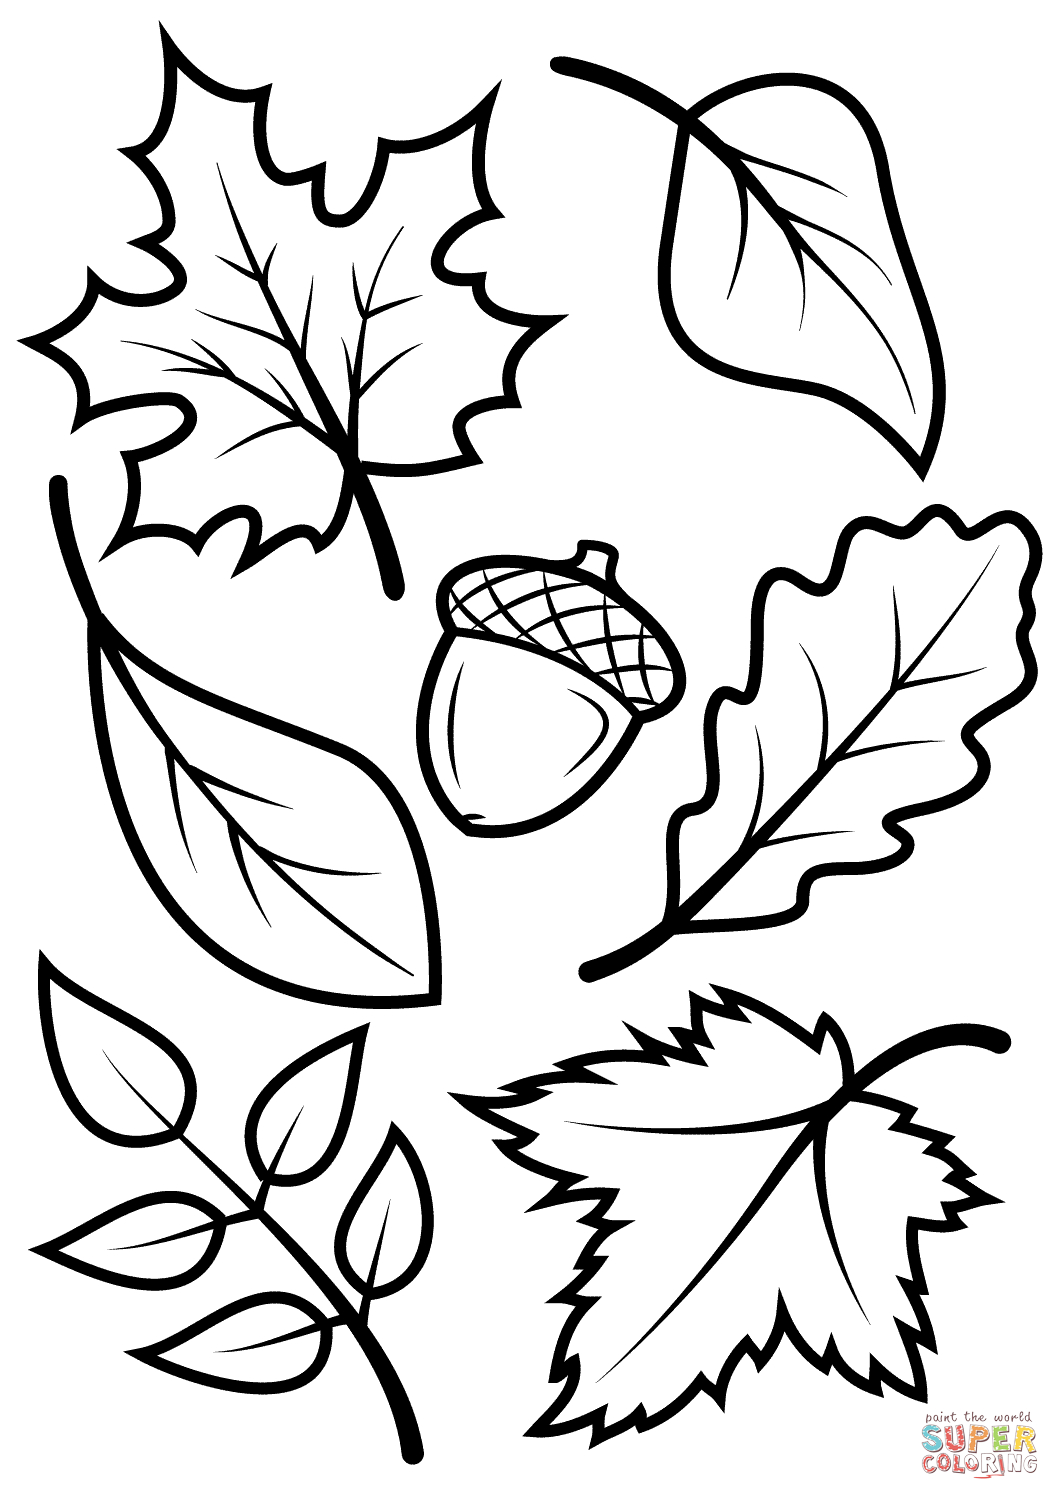 Fall Leaves And Acorn Coloring Page | Free Printable Coloring Pages - Free Printable Leaf Coloring Pages